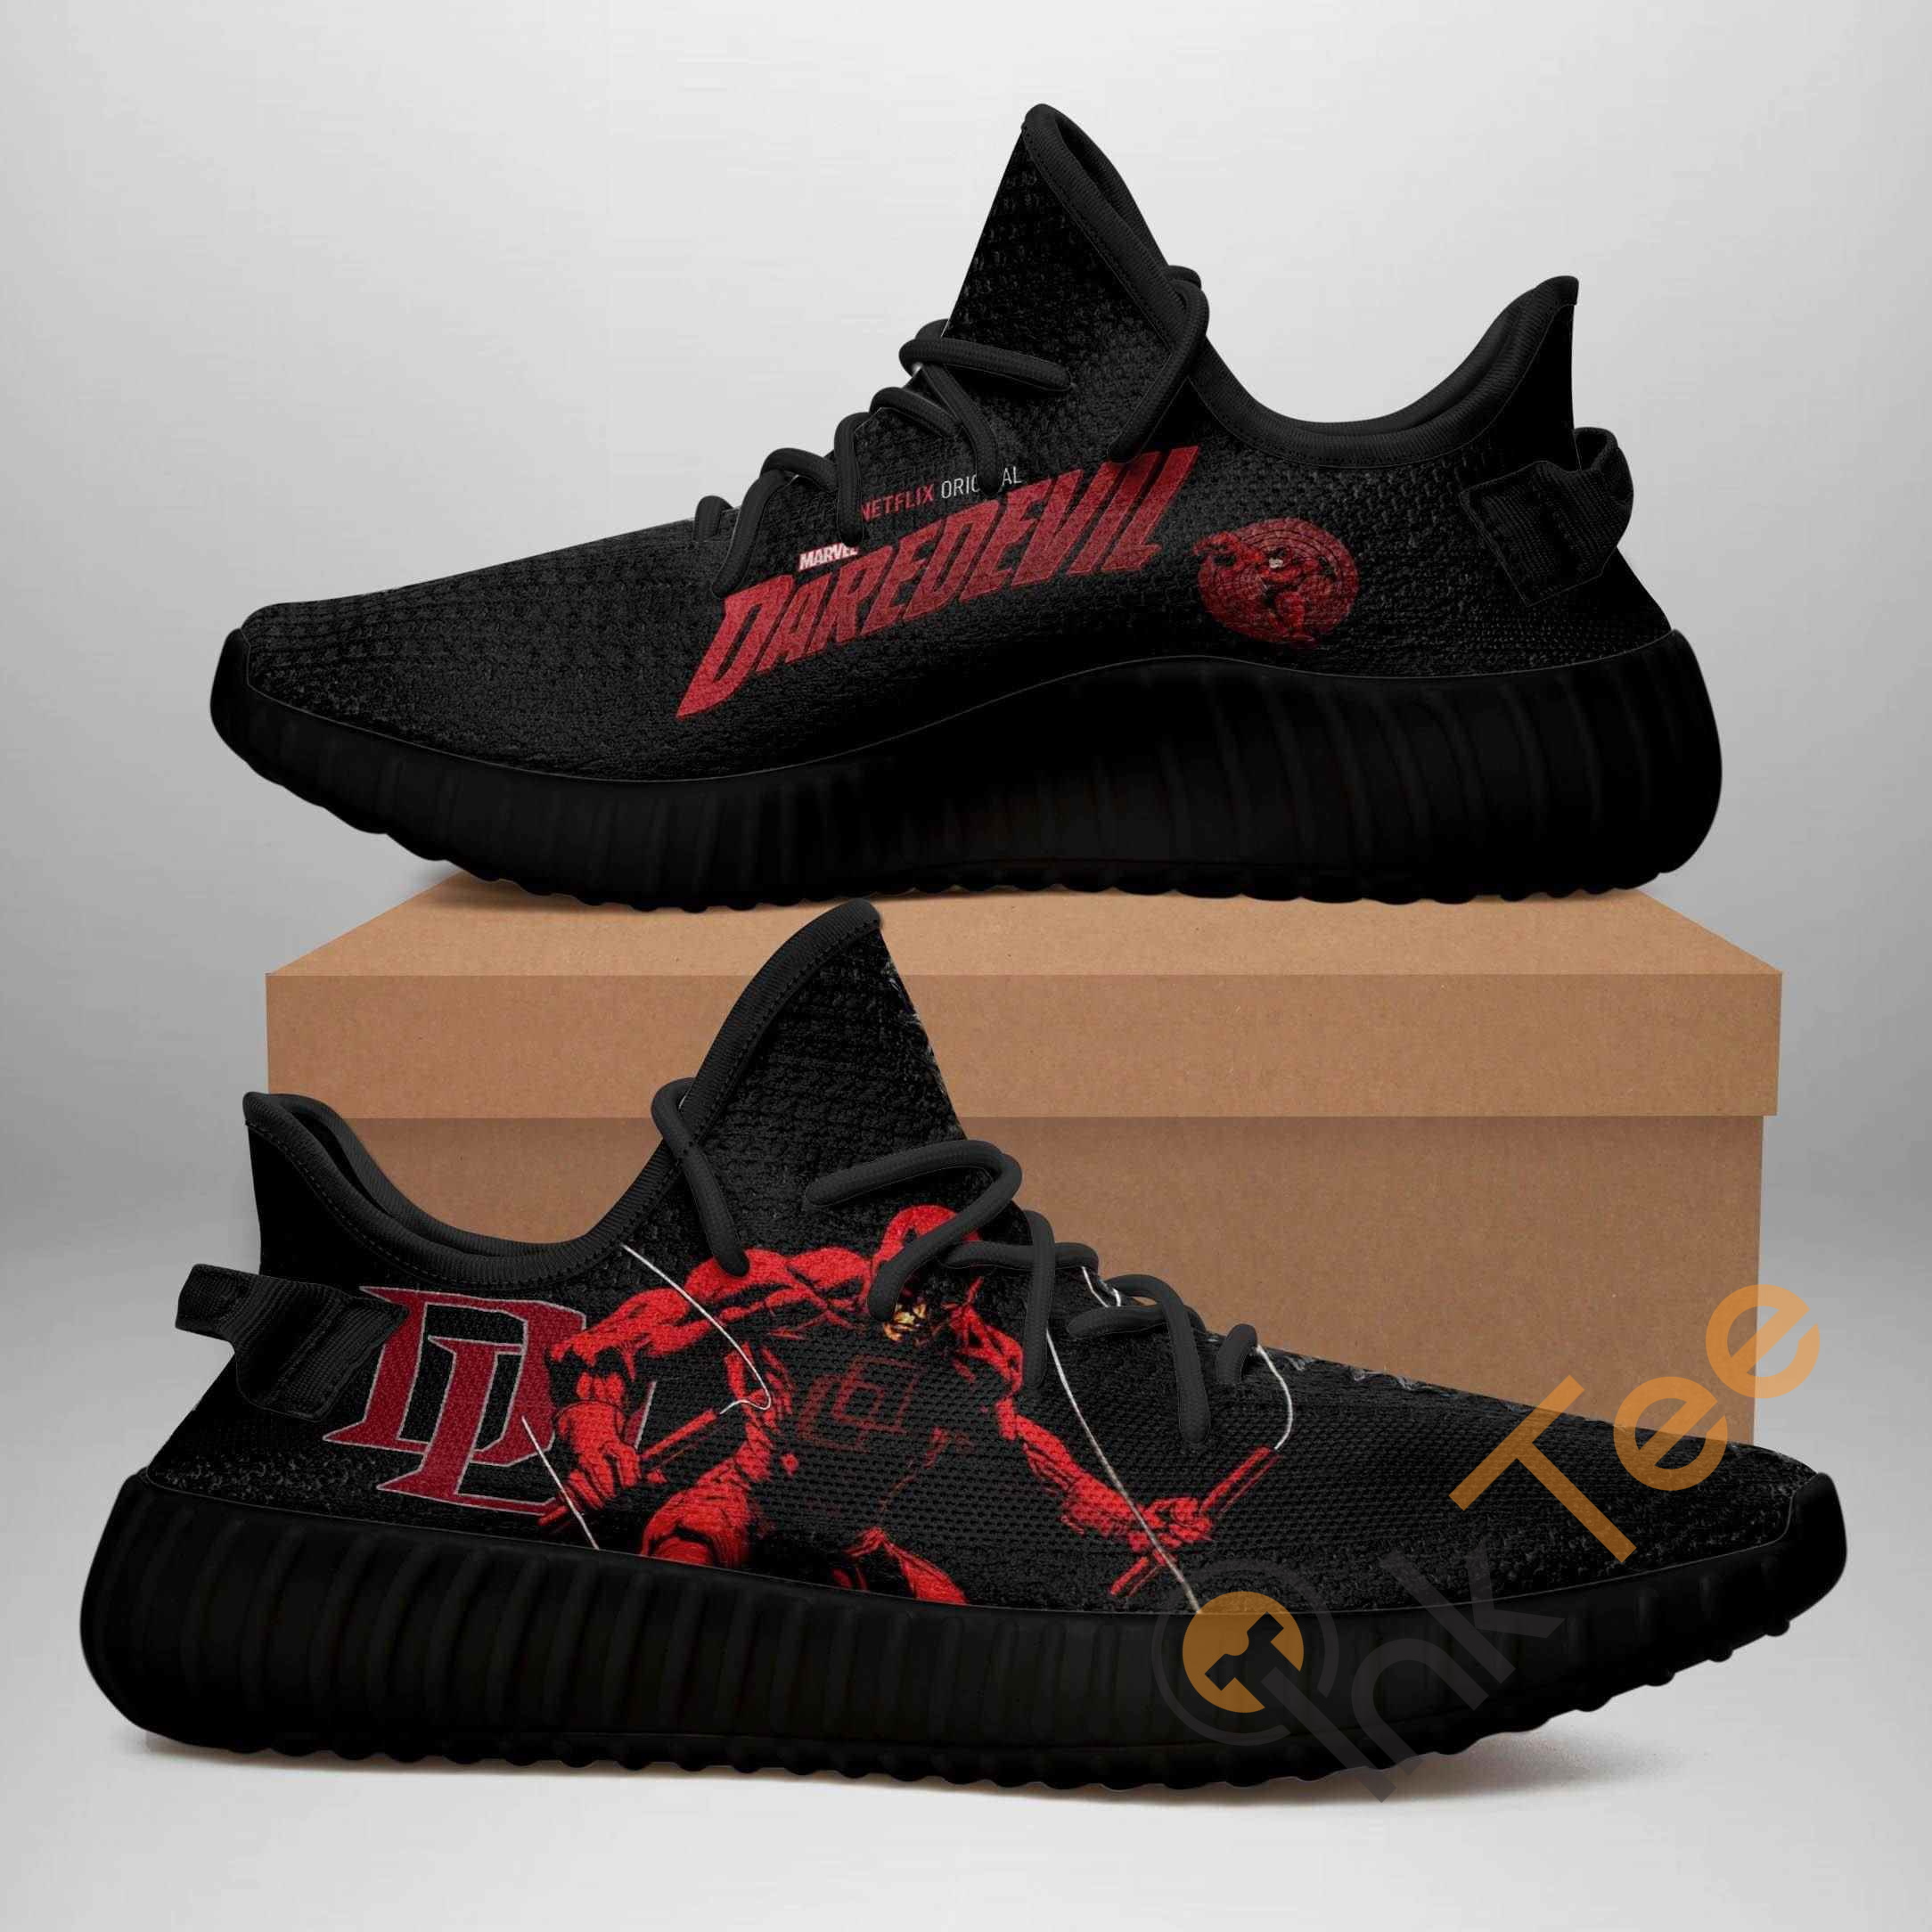 Edition Amazon Best Selling Yeezy Boost